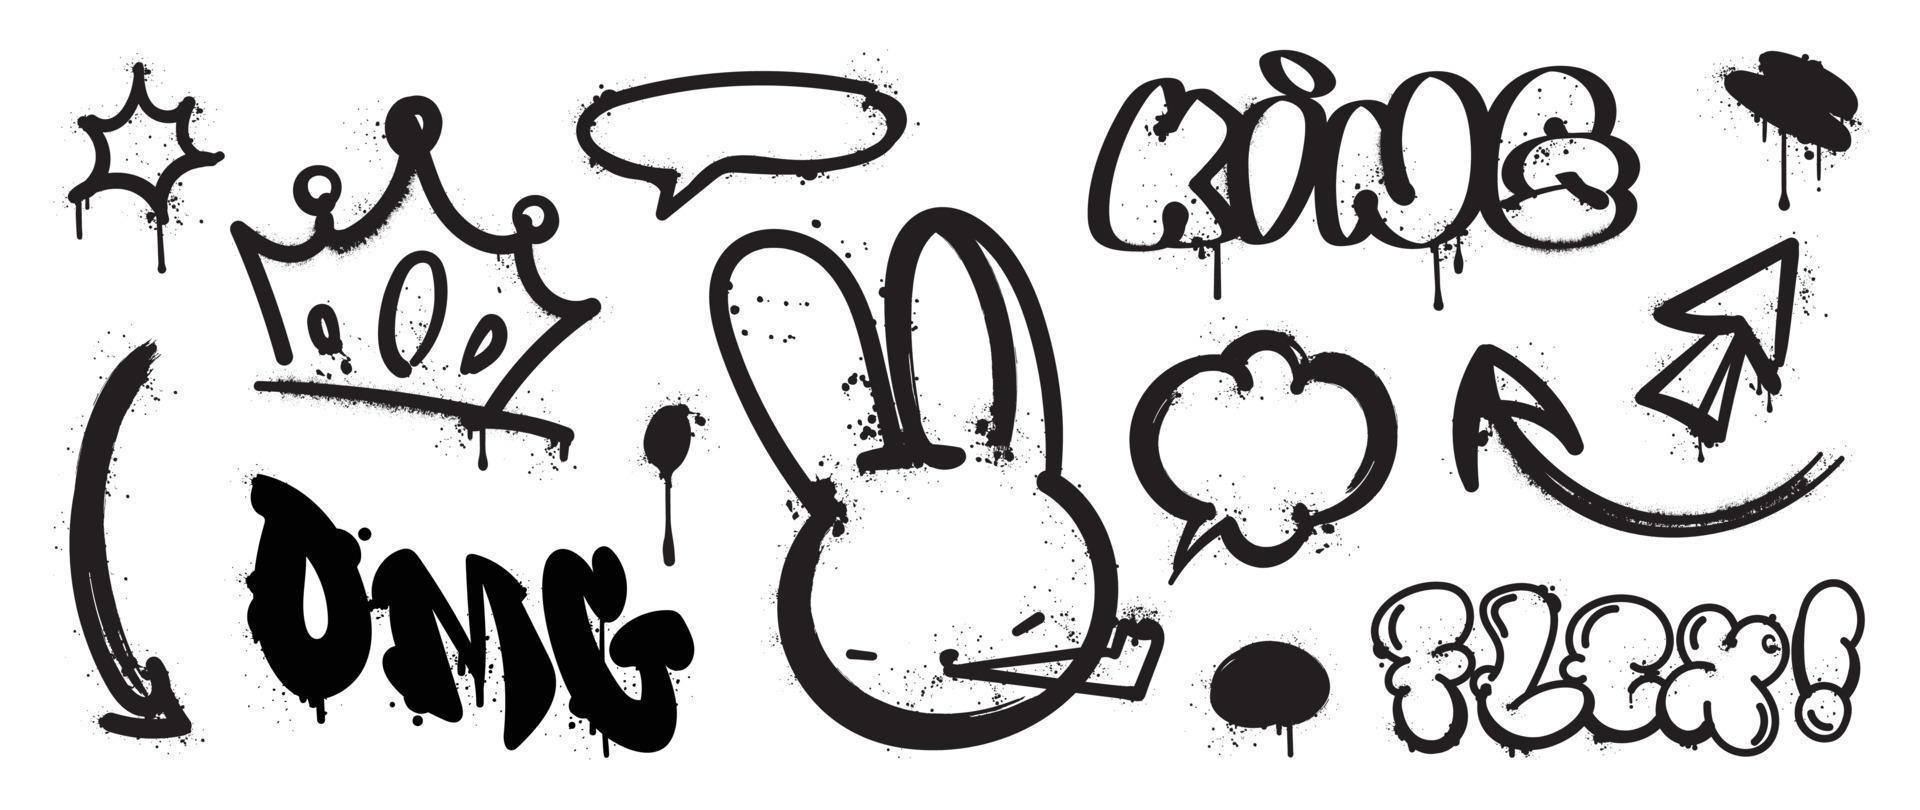 Set of graffiti spray pattern. Collection of black symbols, arrow, rabbit, text, crown and stroke with spray texture. Elements on white background for banner, decoration, street art and ads. vector